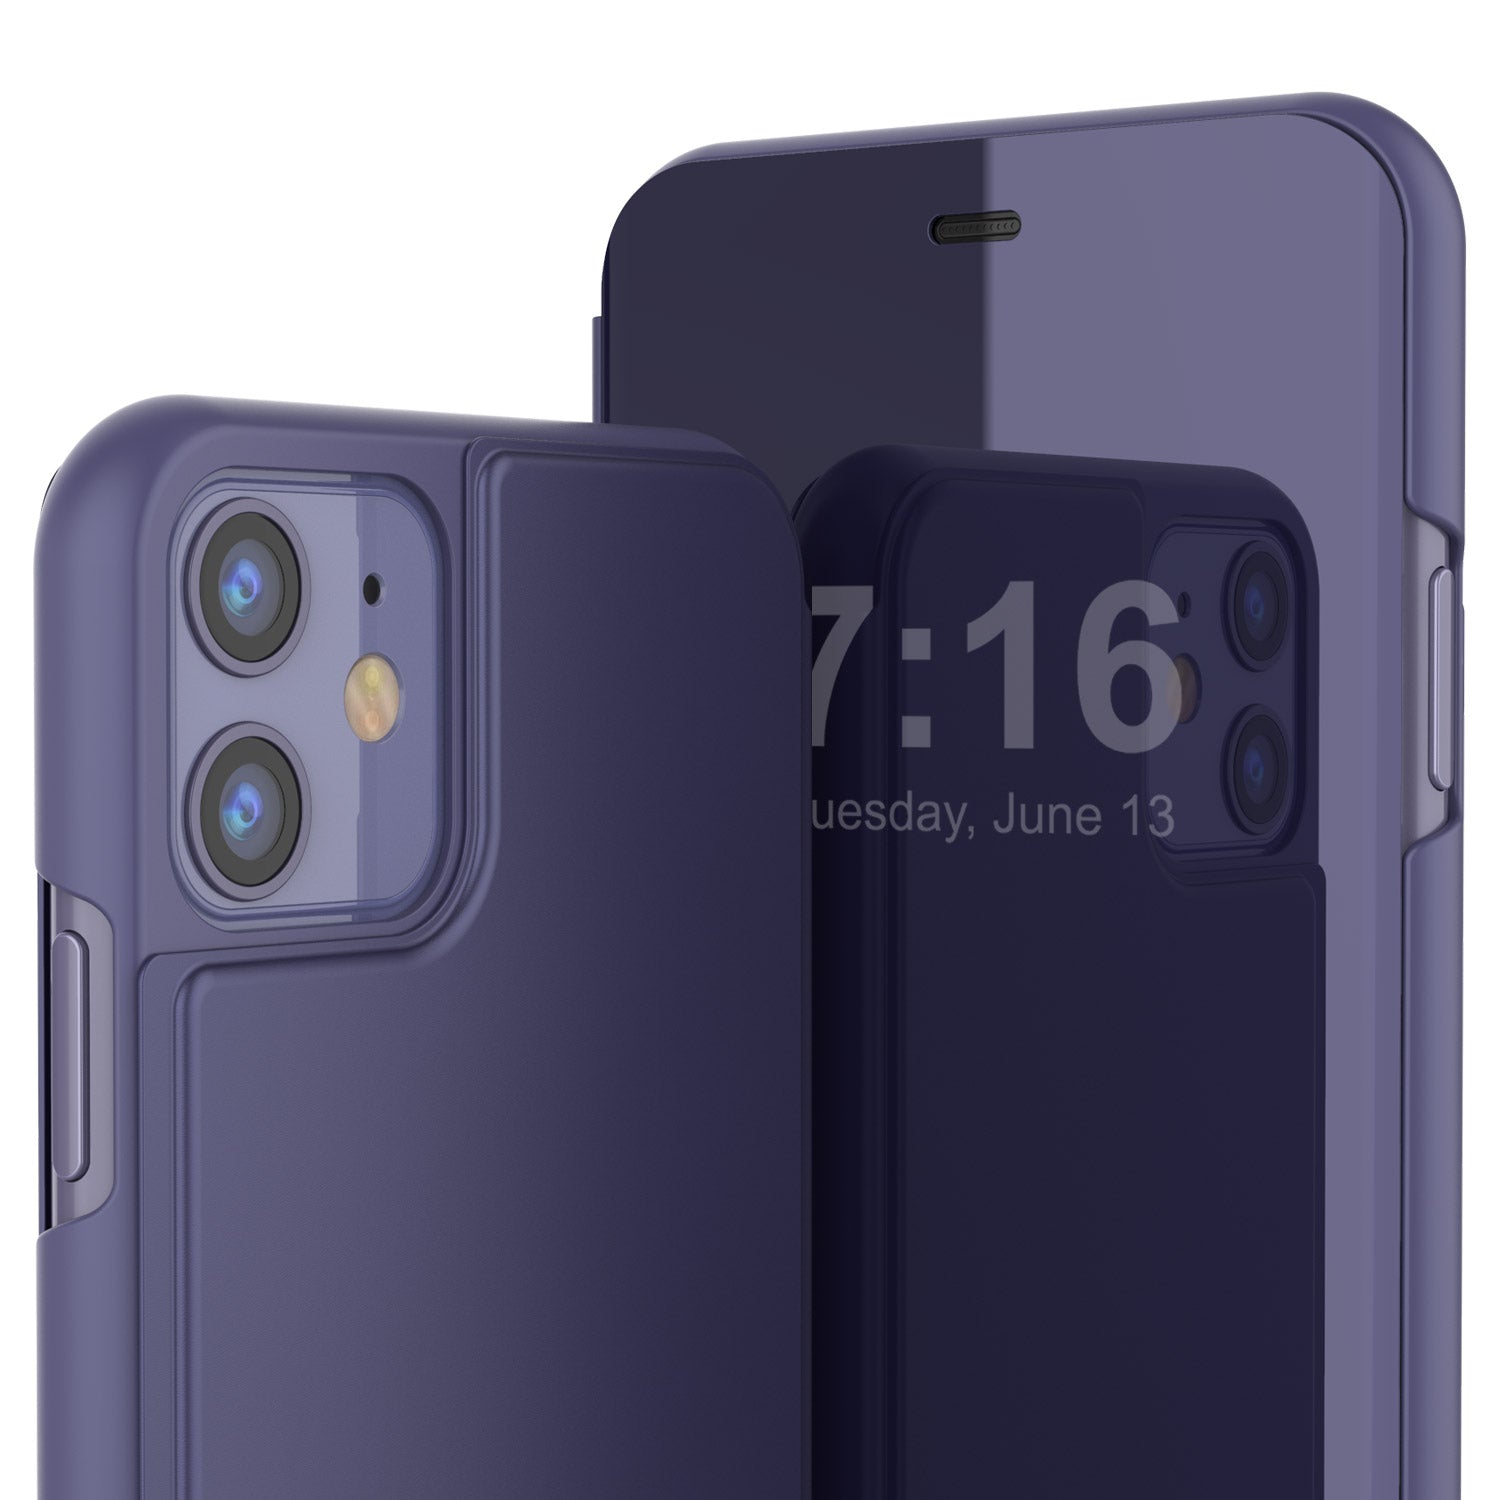 Punkcase iPhone 11 / XI Reflector Case Protective Flip Cover [Purple]